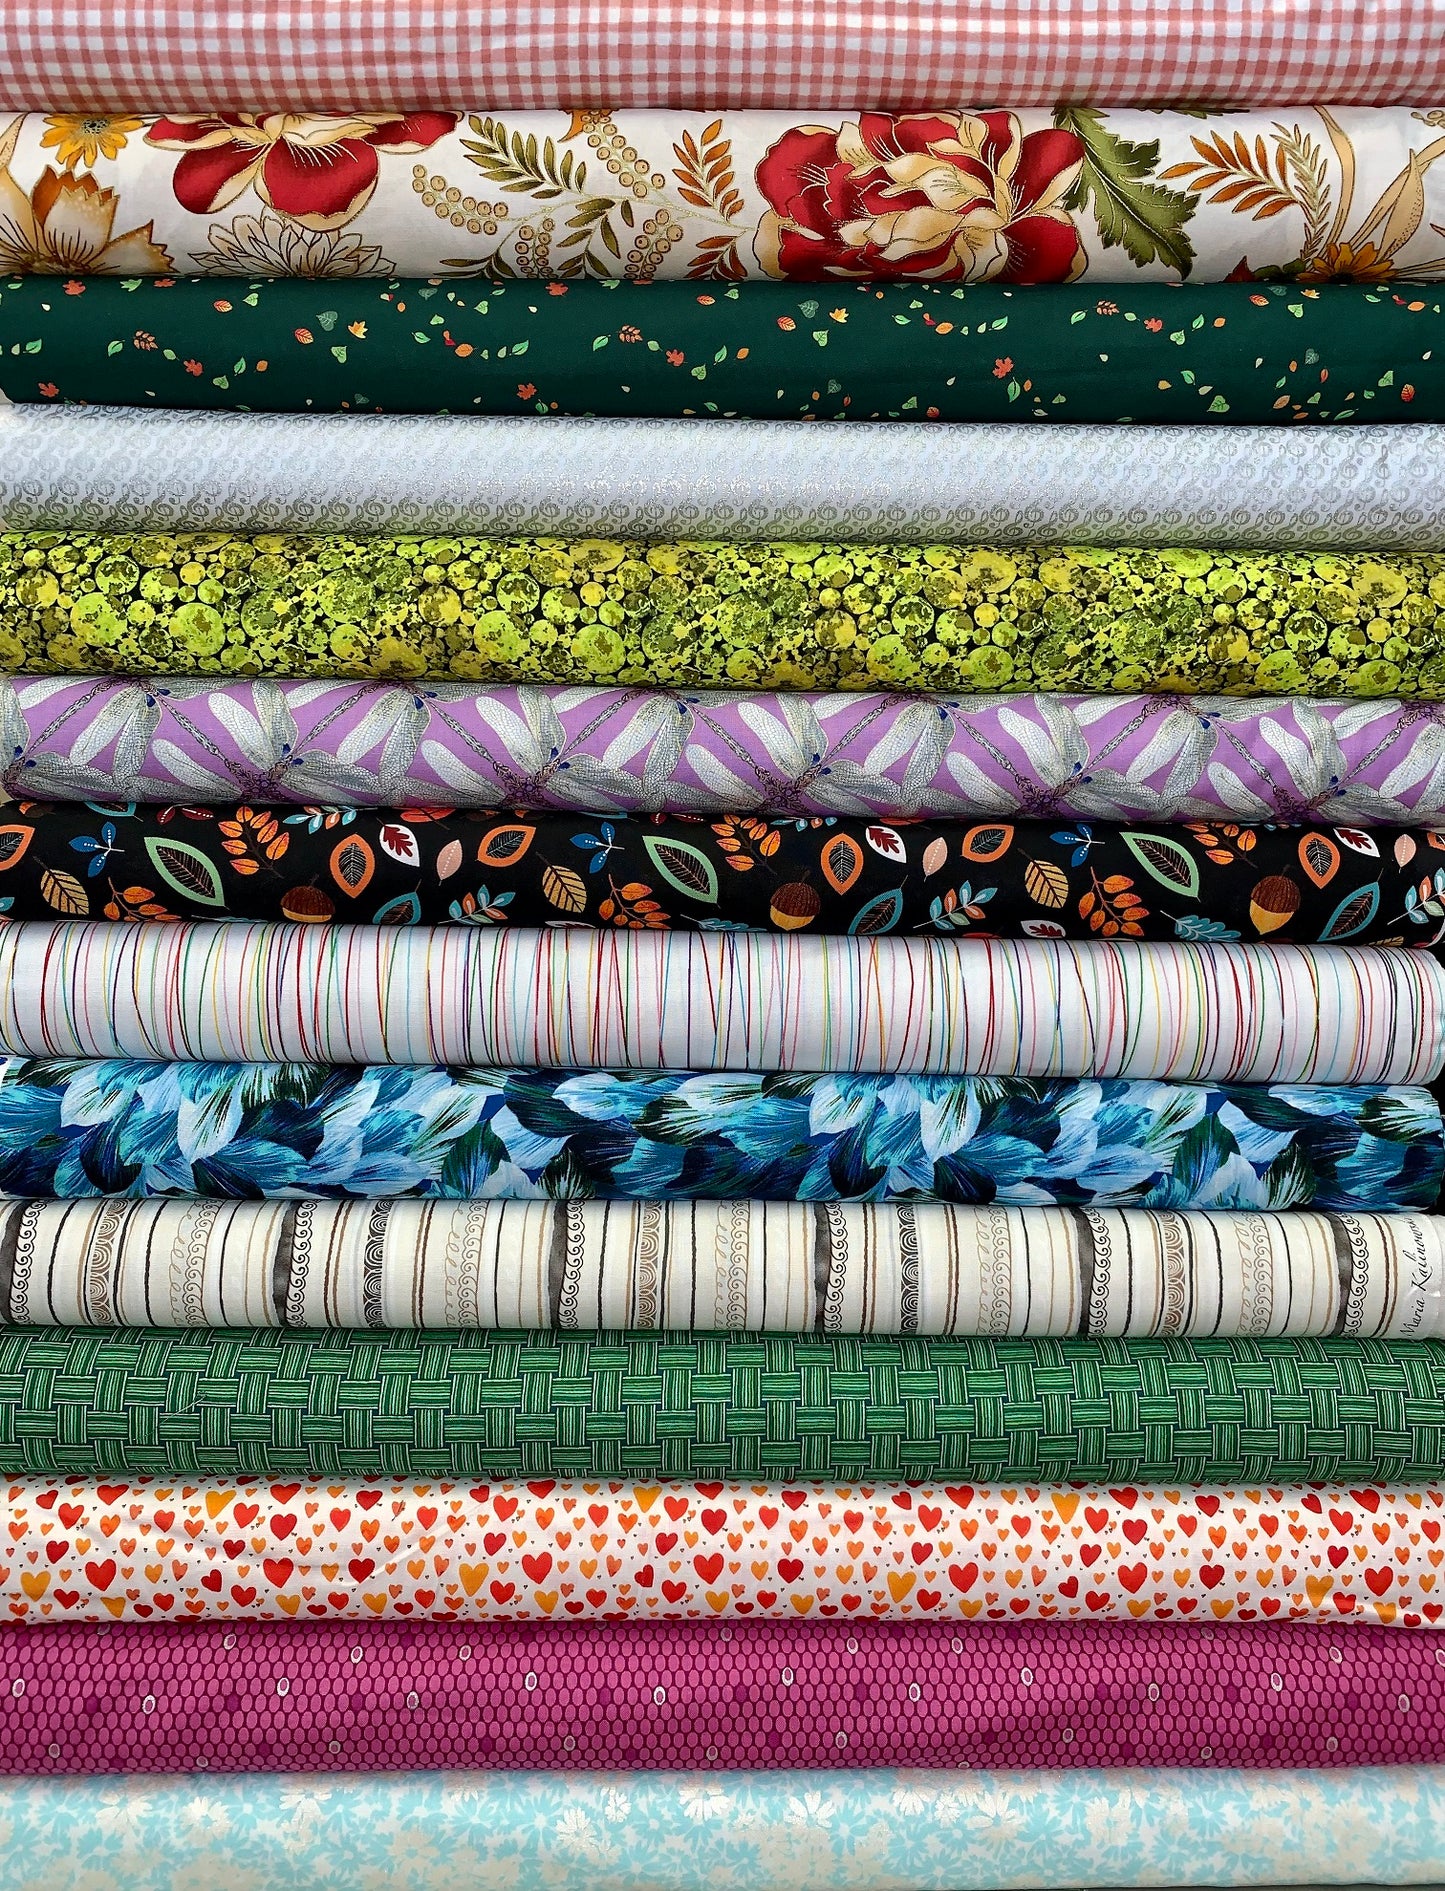 (Promo Now Over) Free Benartex Quilting Yardage With Benartex Strip-pies Purchases!